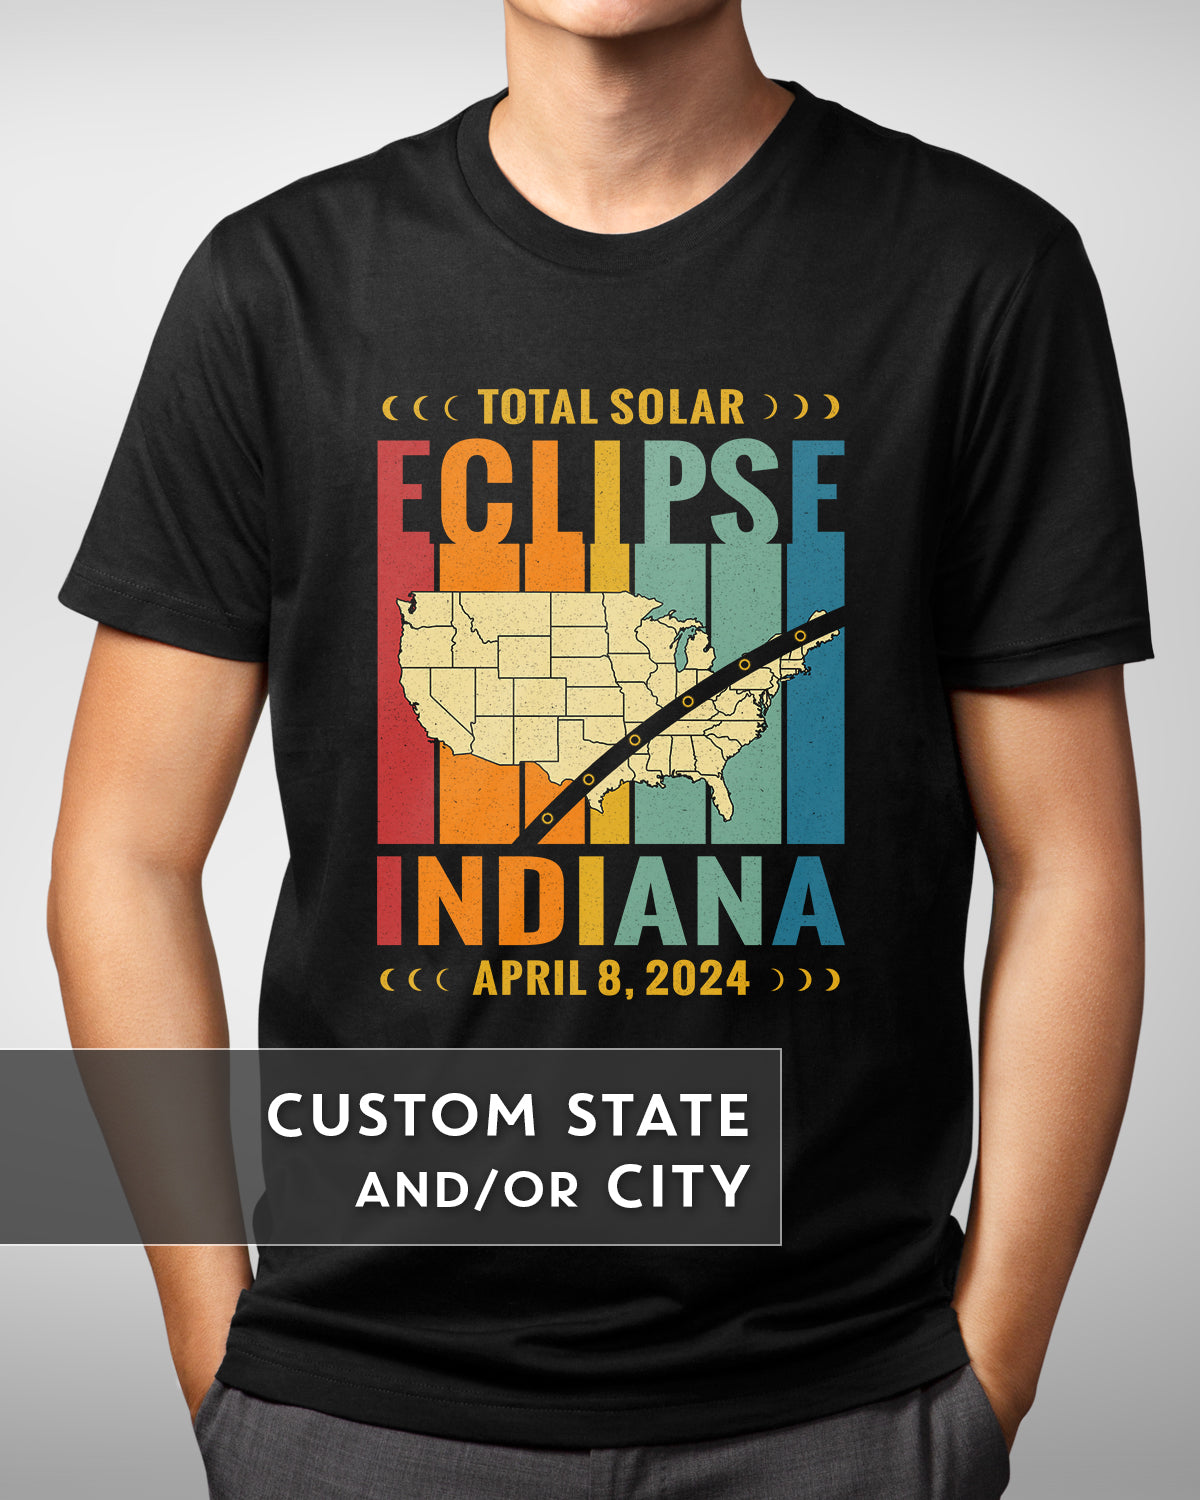 Vintage Solar Eclipse 2024 USA Map Shirt, Customizable State City Tee, Path of Totality, April 8 Great American Eclipse Souvenir